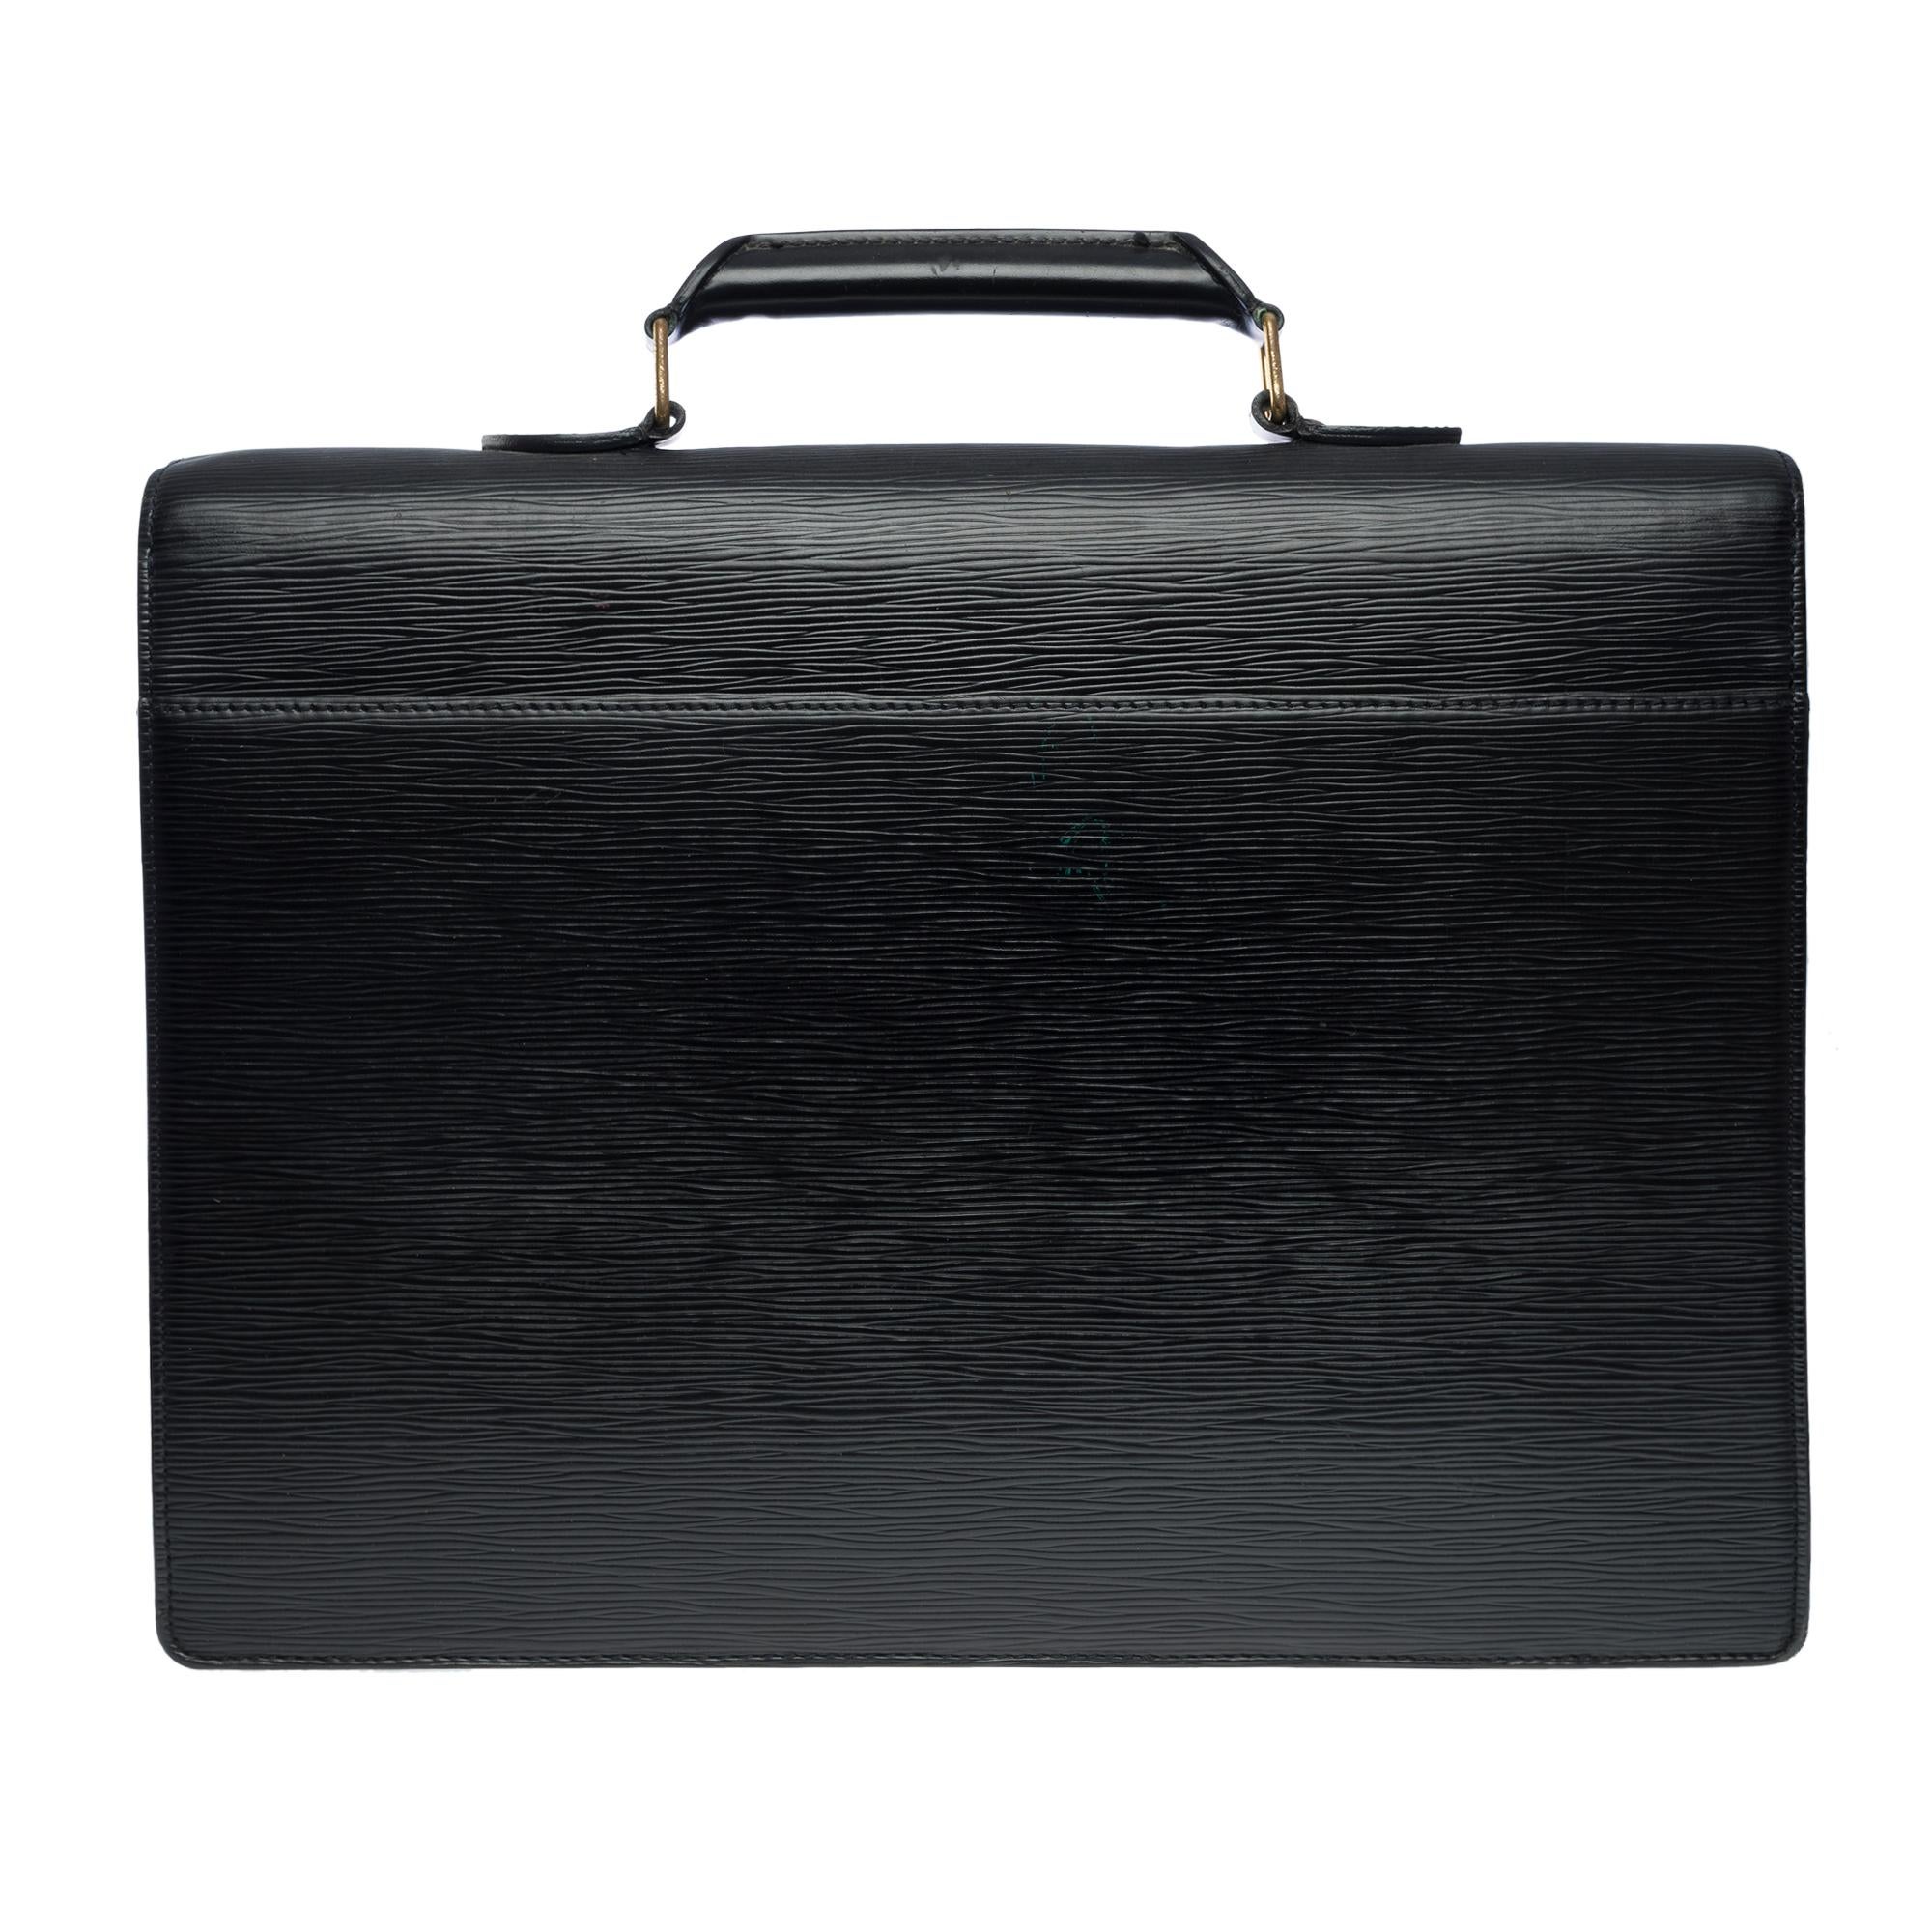 Classy Louis Vuitton Ambassador briefcase in black epi leather, gold metal hardware, simple black leather handle for hand carrying

Flap closure by lock clasp
A patch pocket on the back of the bag
Black leather inner lining, 2 compartments, 1 patch